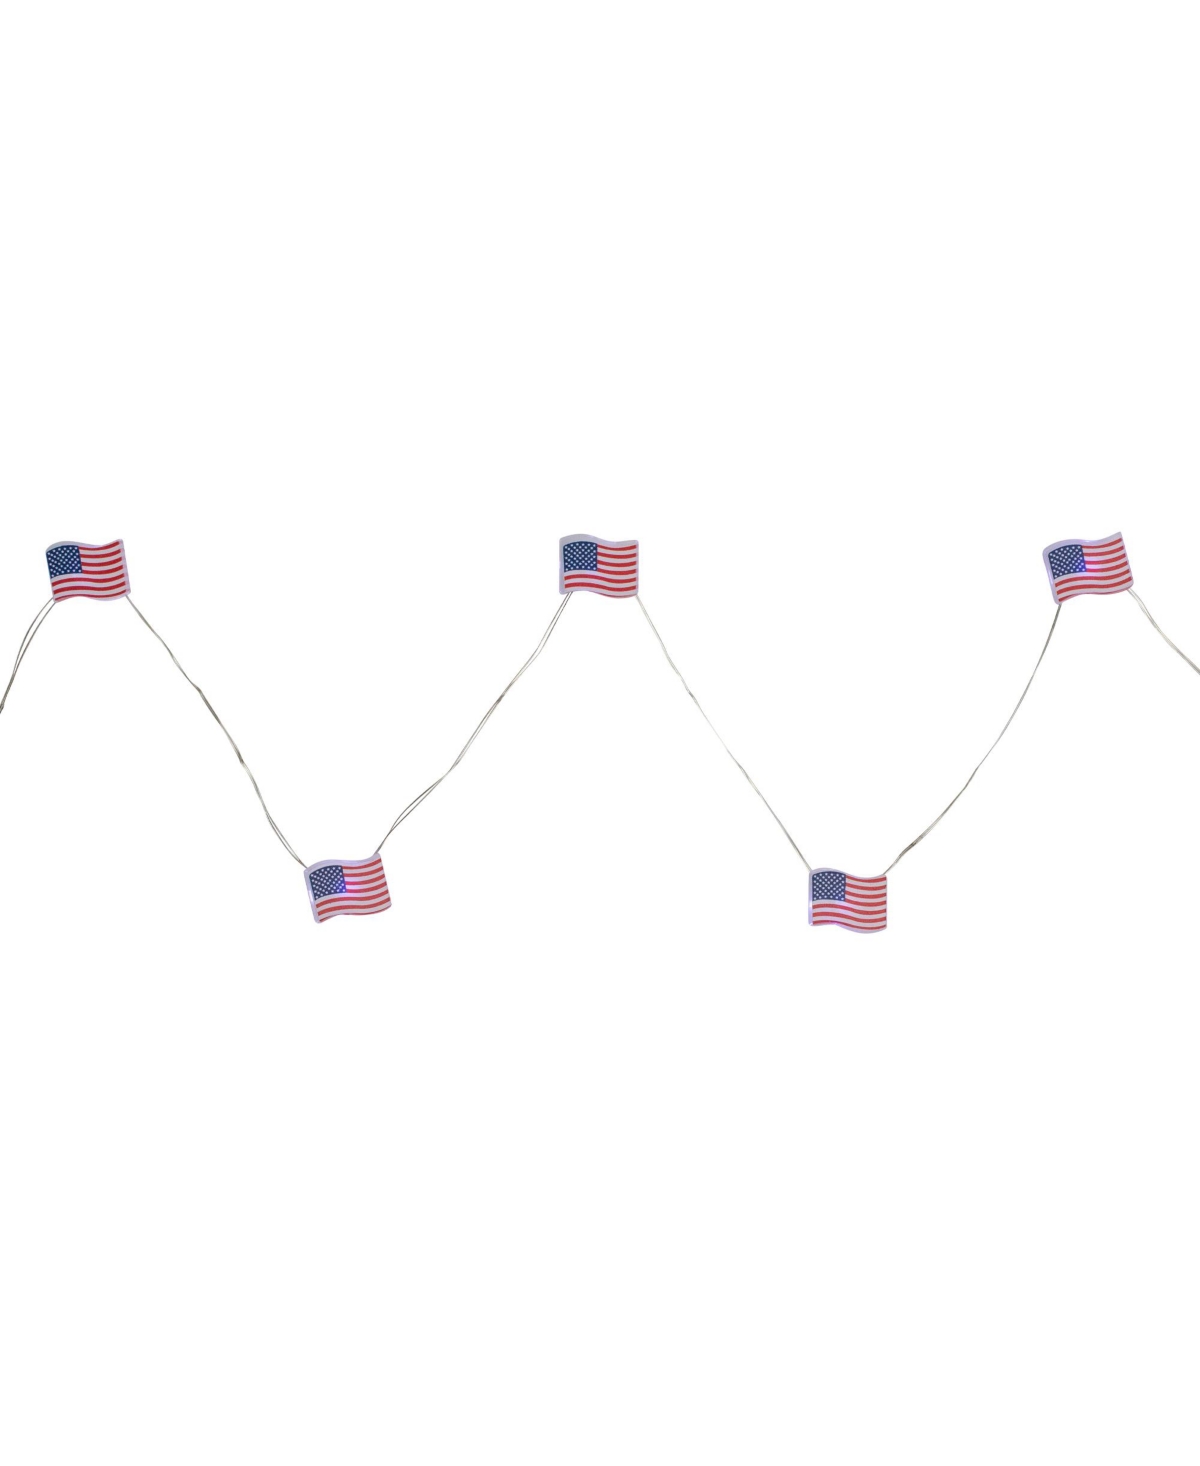 Northlight 20-count Patriotic Americana Usa Flag Led Fairy Lights 6.25' Copper Wire In Red